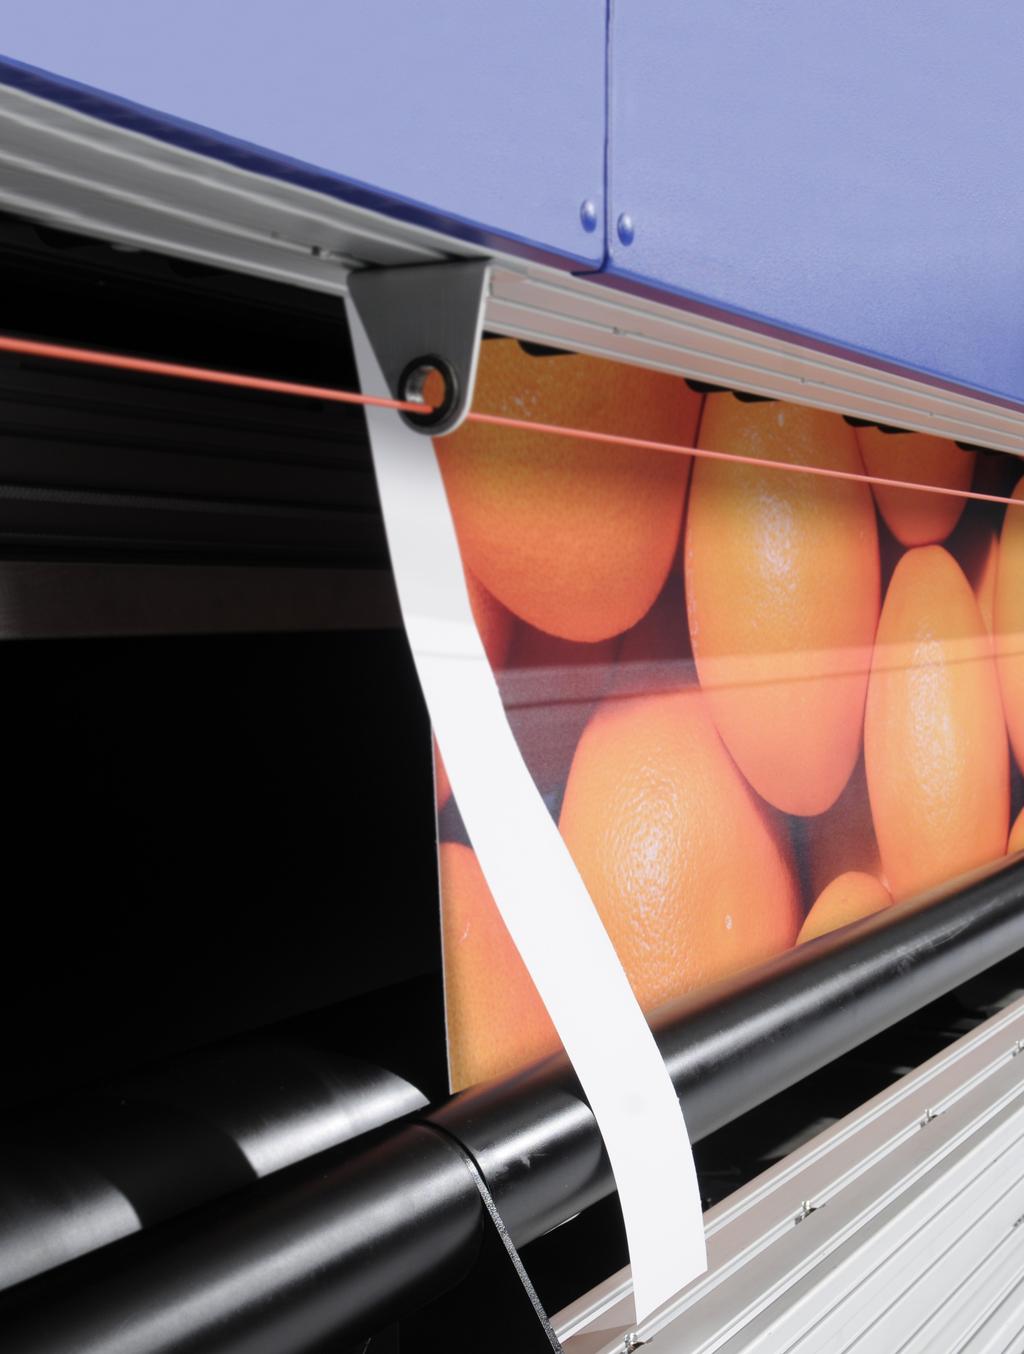 Superwide Roll-to-roll Printers Value-added Options Meet your application needs with